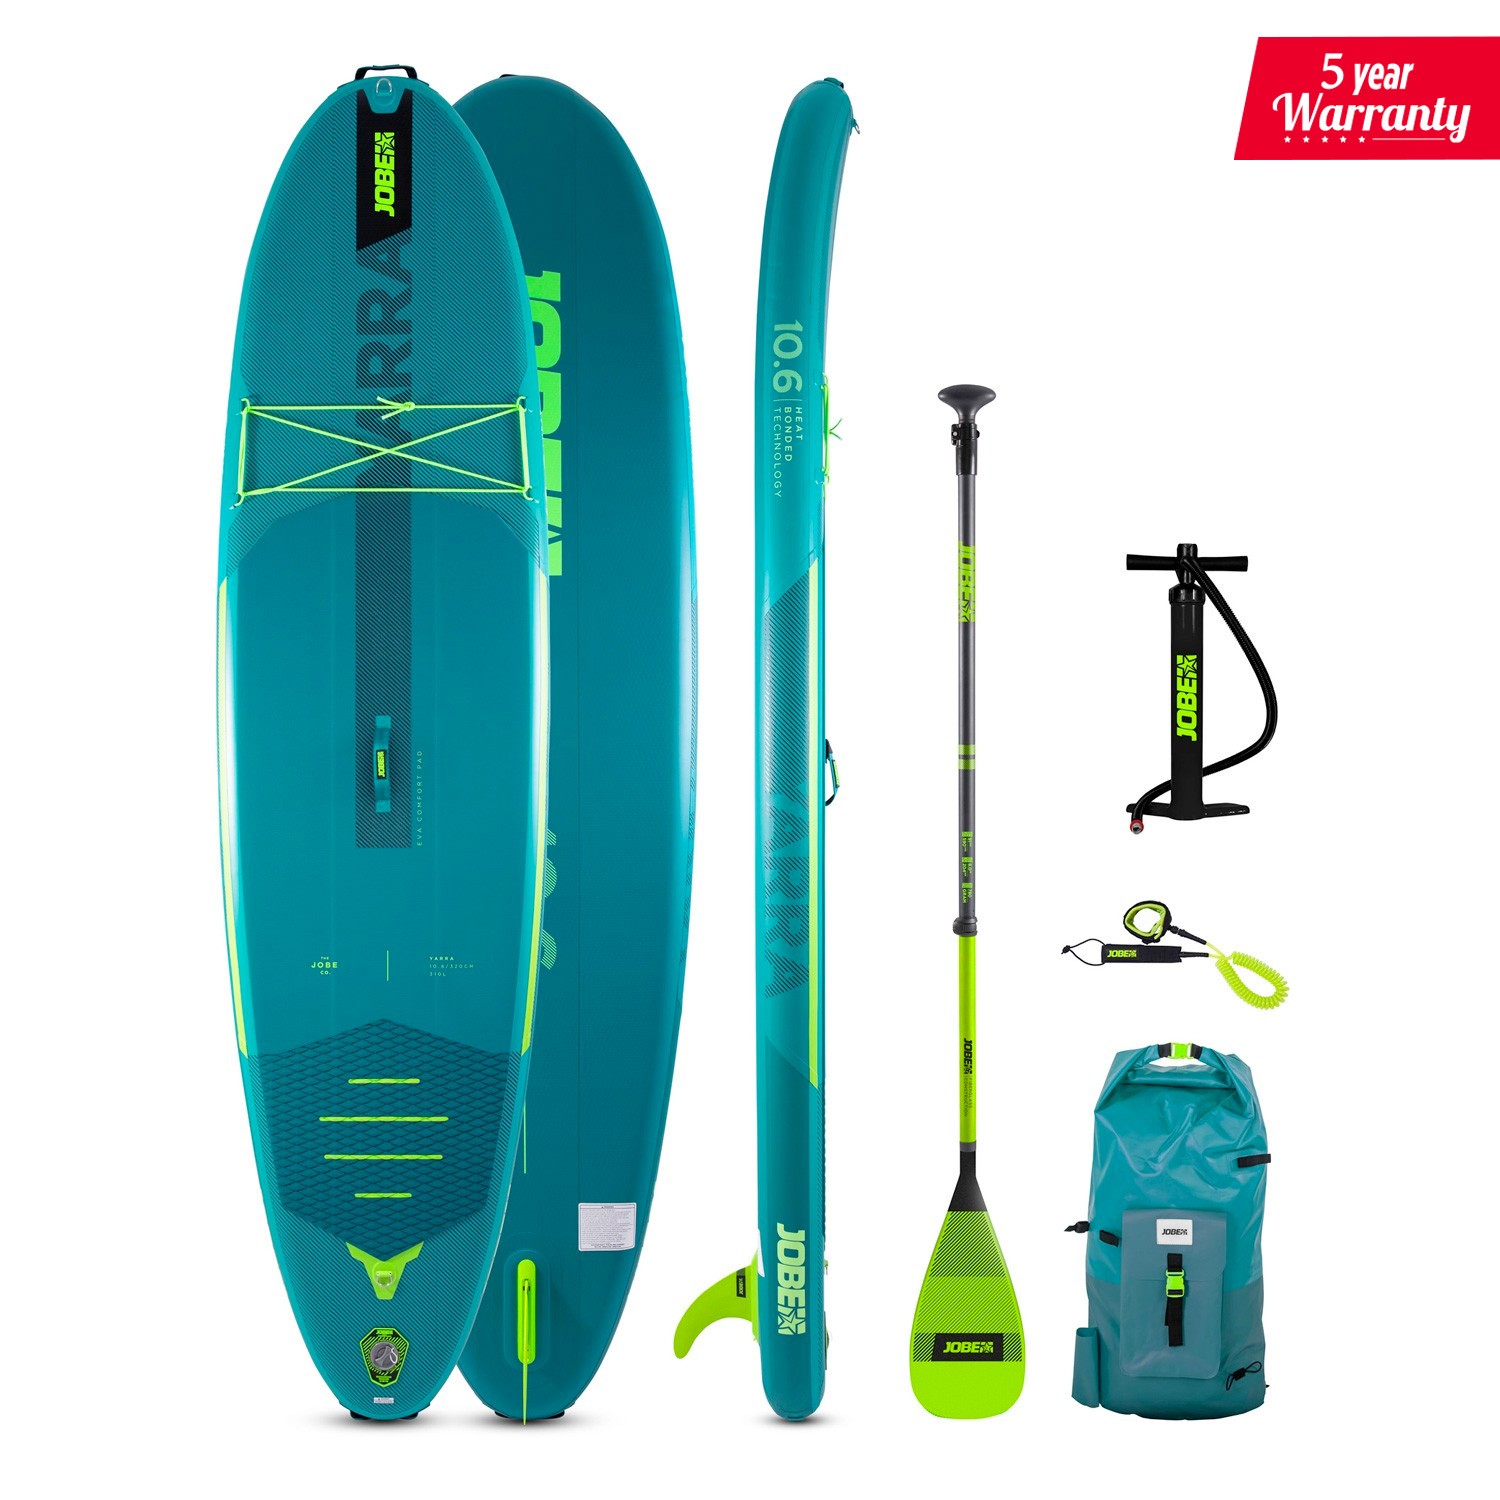 Jobe Yarra 10.6 SUP Board Gonflable Paquet Teal